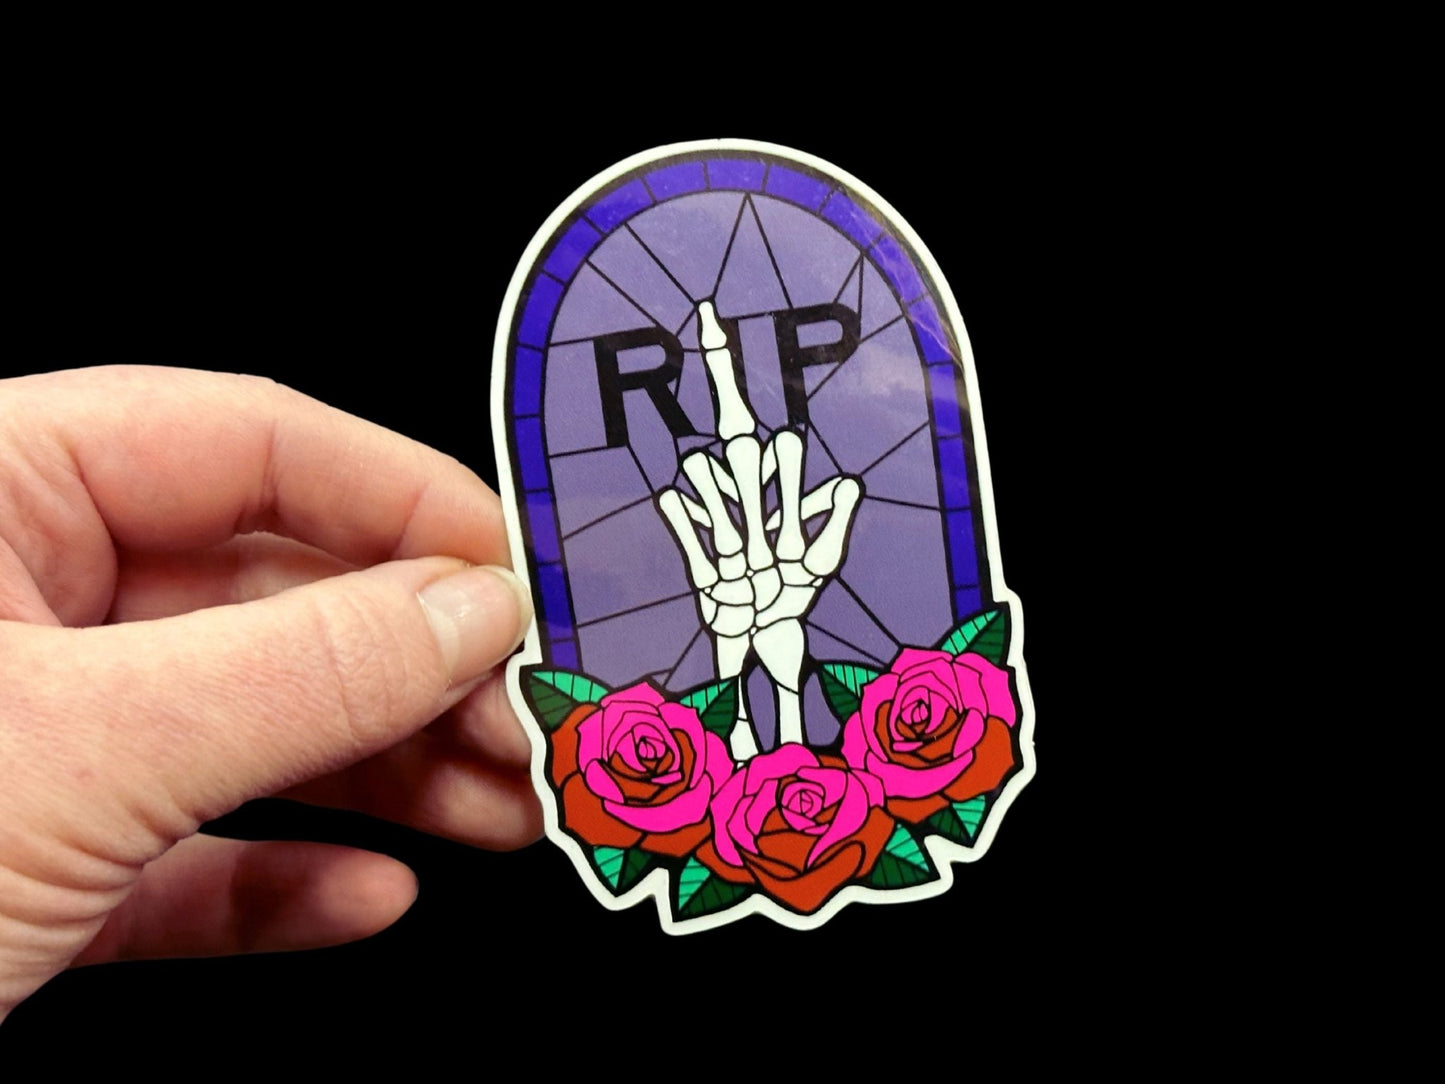 Rest in Pieces Premium Glossy Sticker - Driftless Enchantments